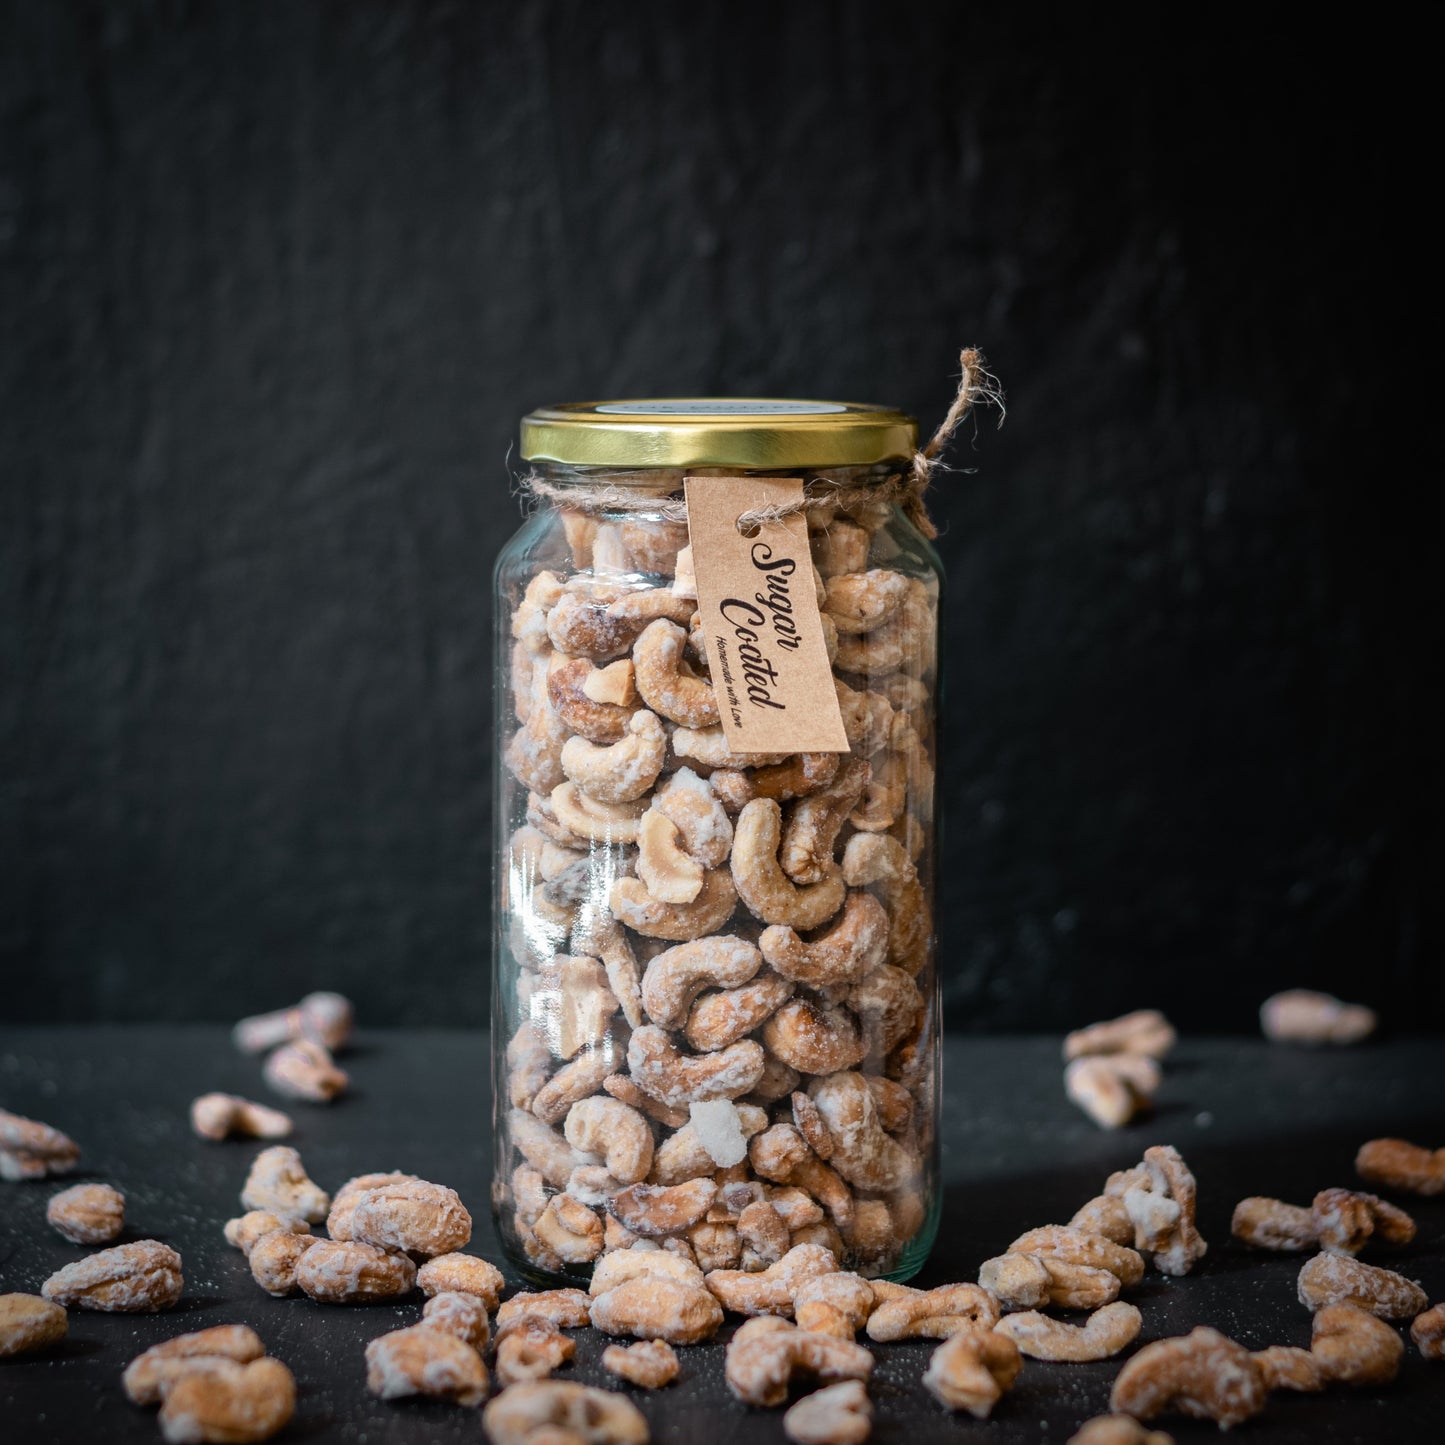 Sugar Coated Cashews - The Nuttery